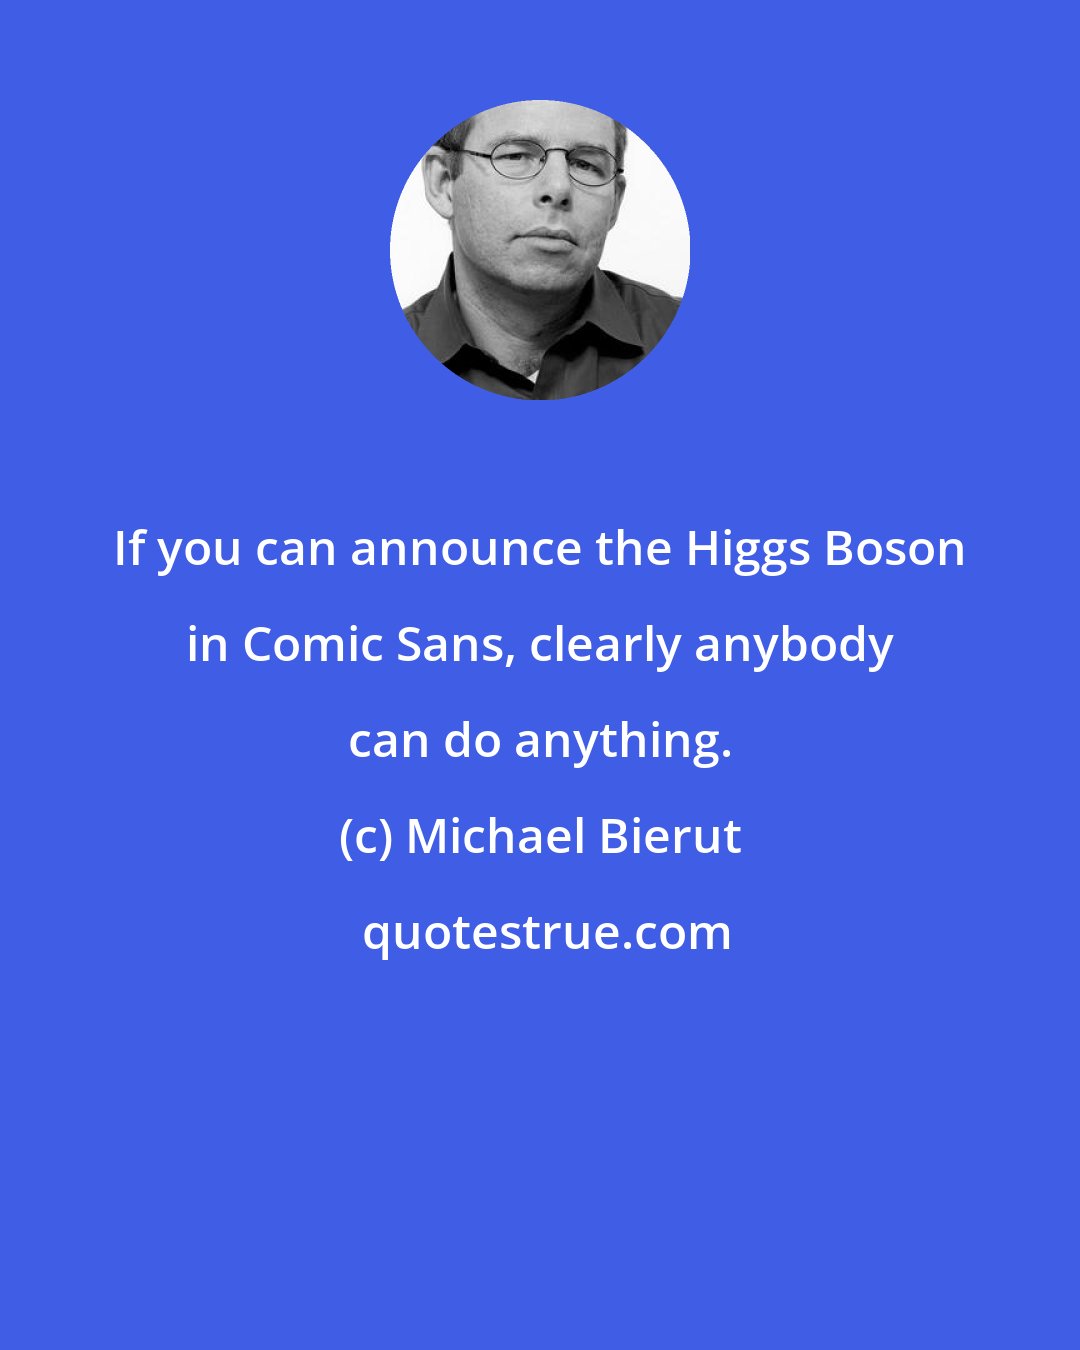 Michael Bierut: If you can announce the Higgs Boson in Comic Sans, clearly anybody can do anything.